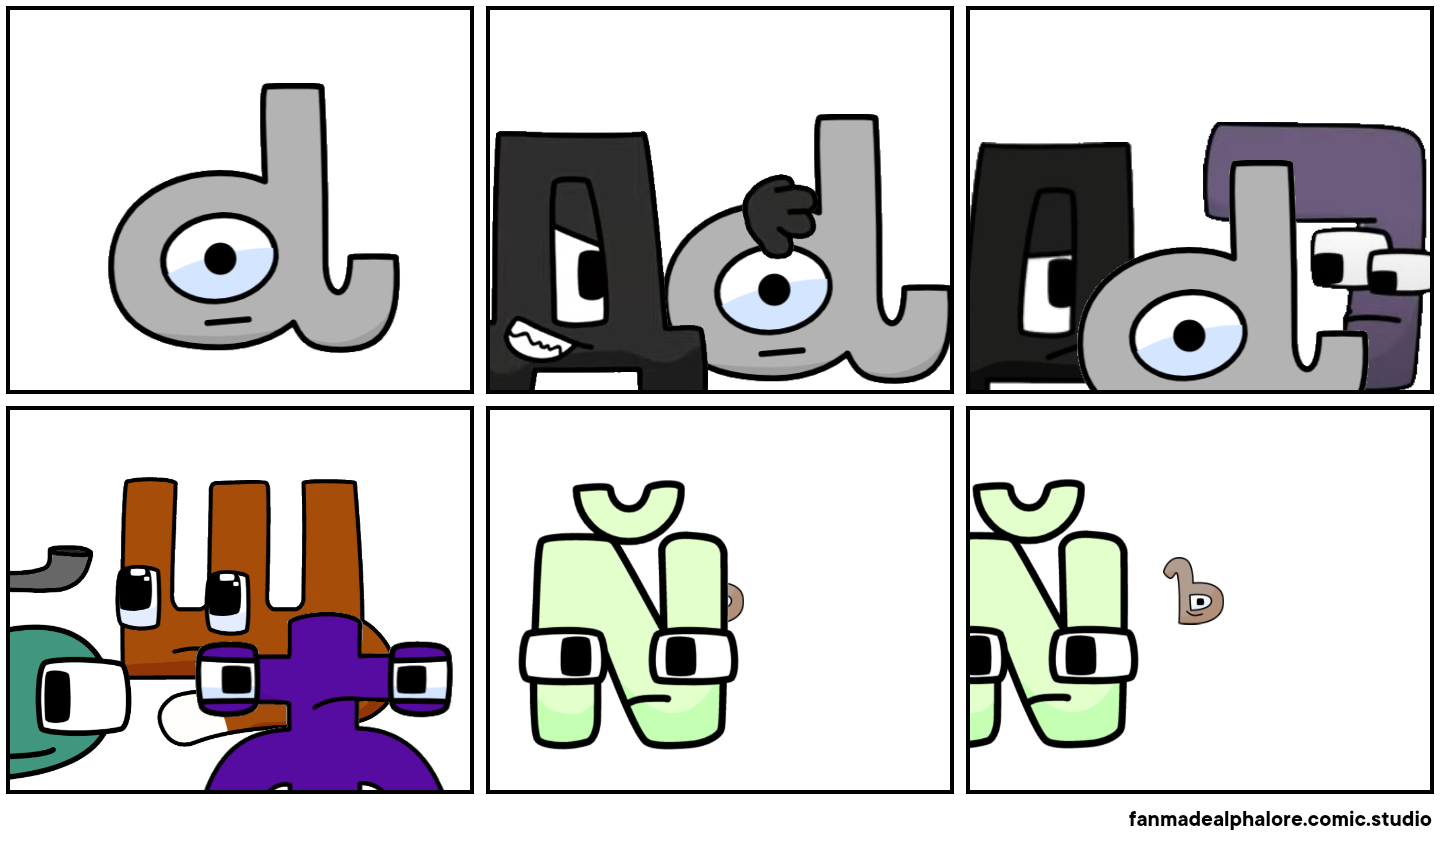 Fanmade Alphabet Lore Comic Studio Banner! by TheBobby65 on DeviantArt